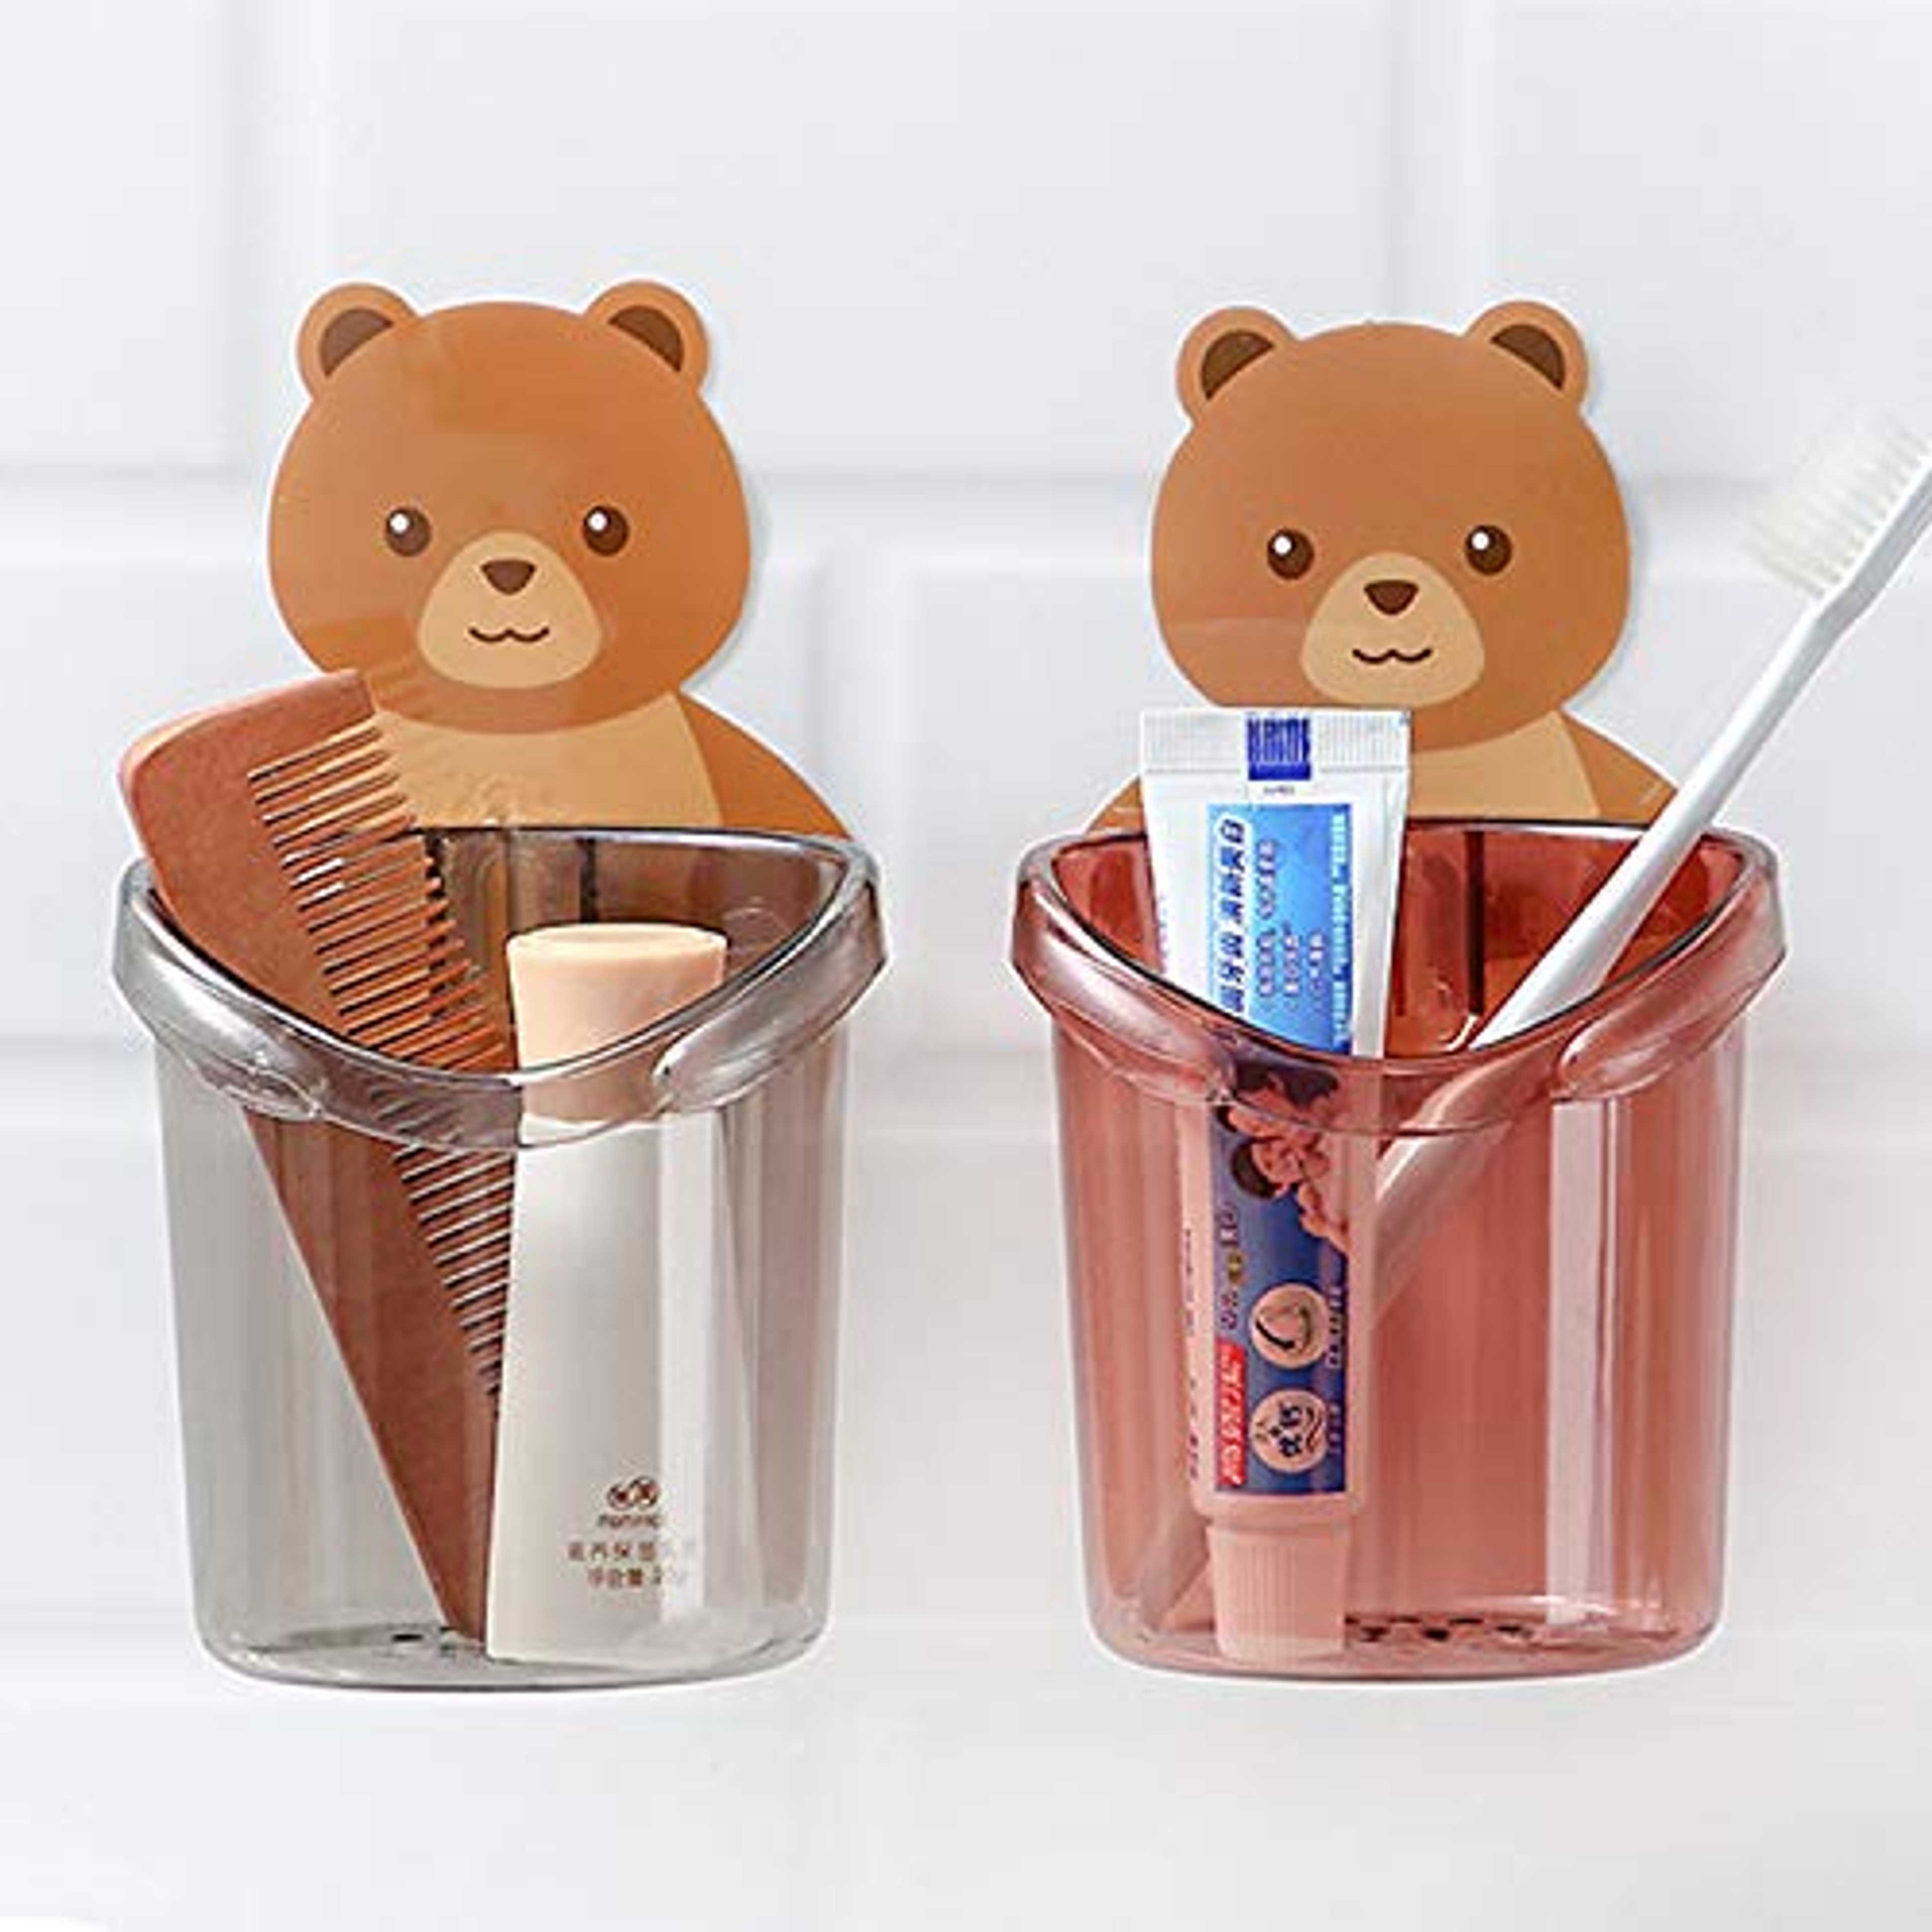 Teddy Bear Tooth Brush Holder for Bathroom Wall Mounted Self Adhesive Tooth Paste Brush Stand for Wash Basin Plastic